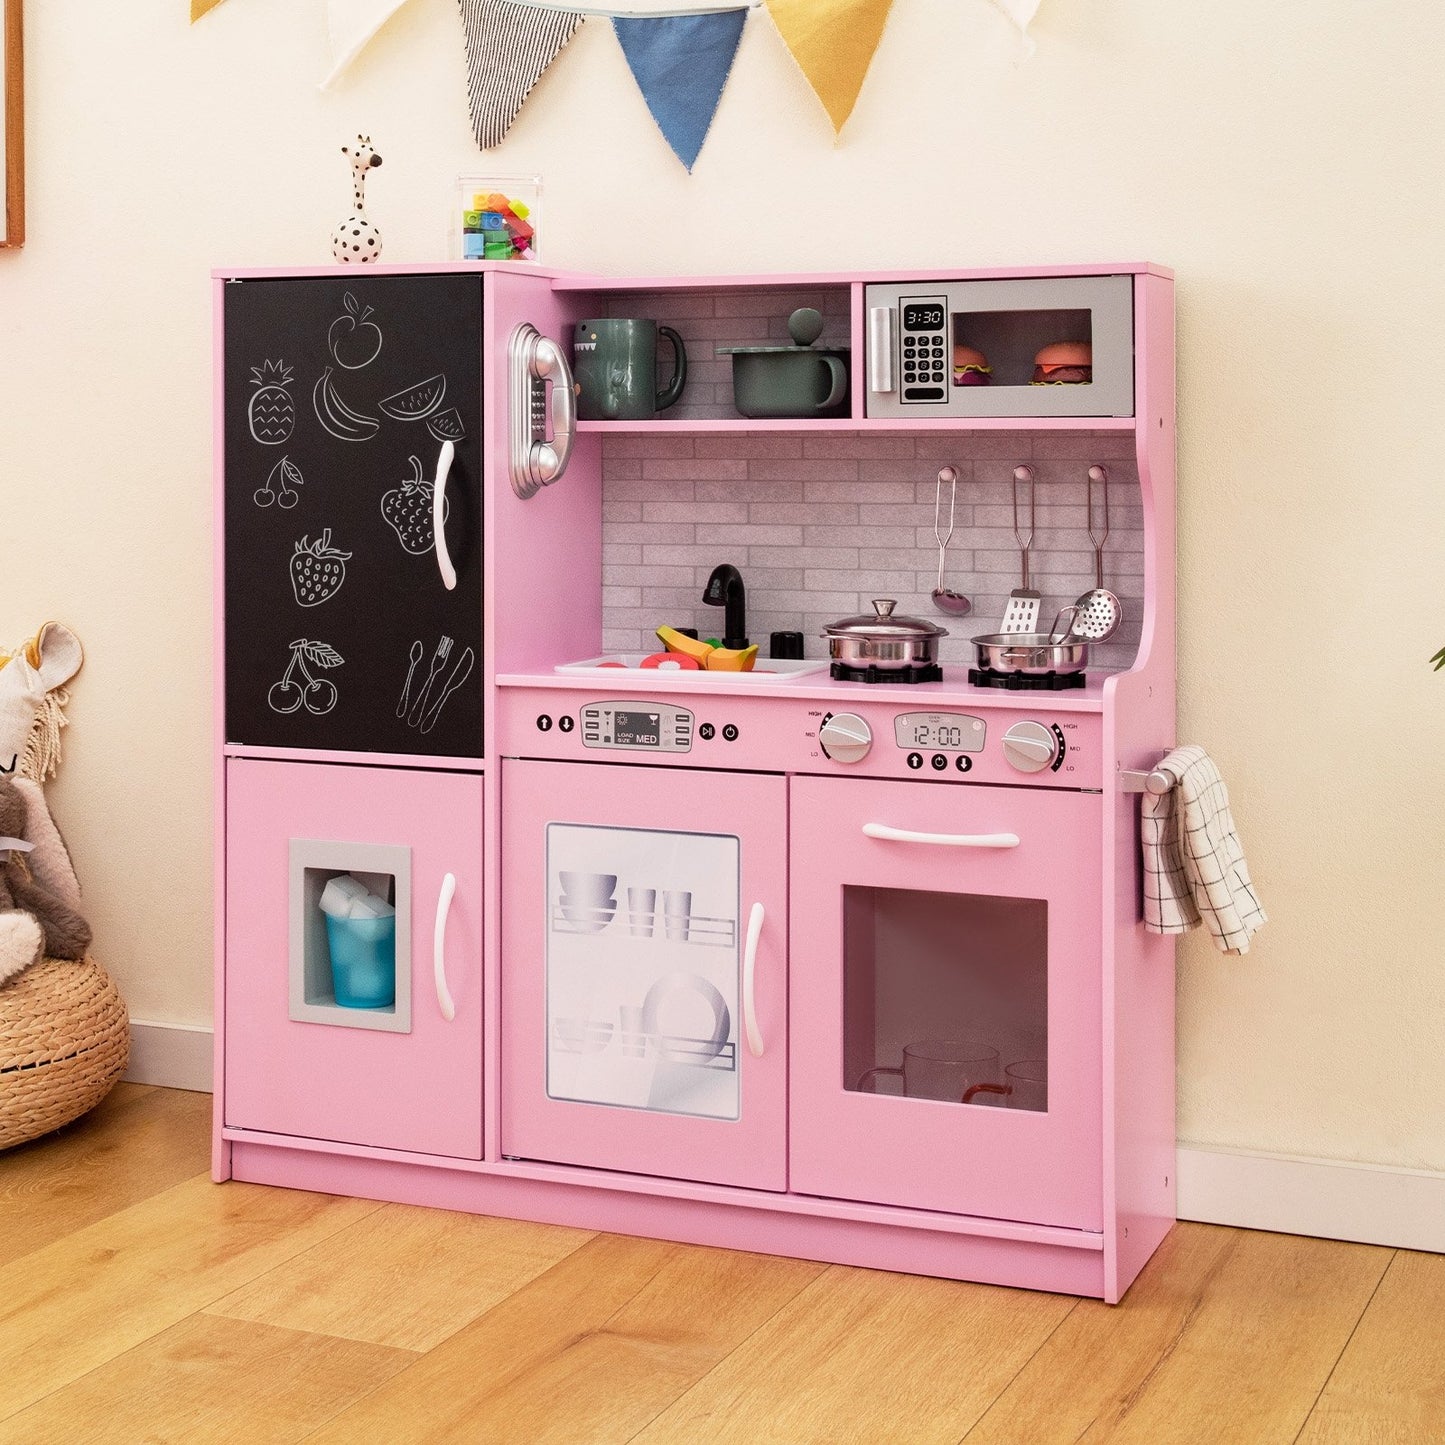 Toddler Pretend Play Kitchen for Boys and Girls 3-6 Years Old, Pink